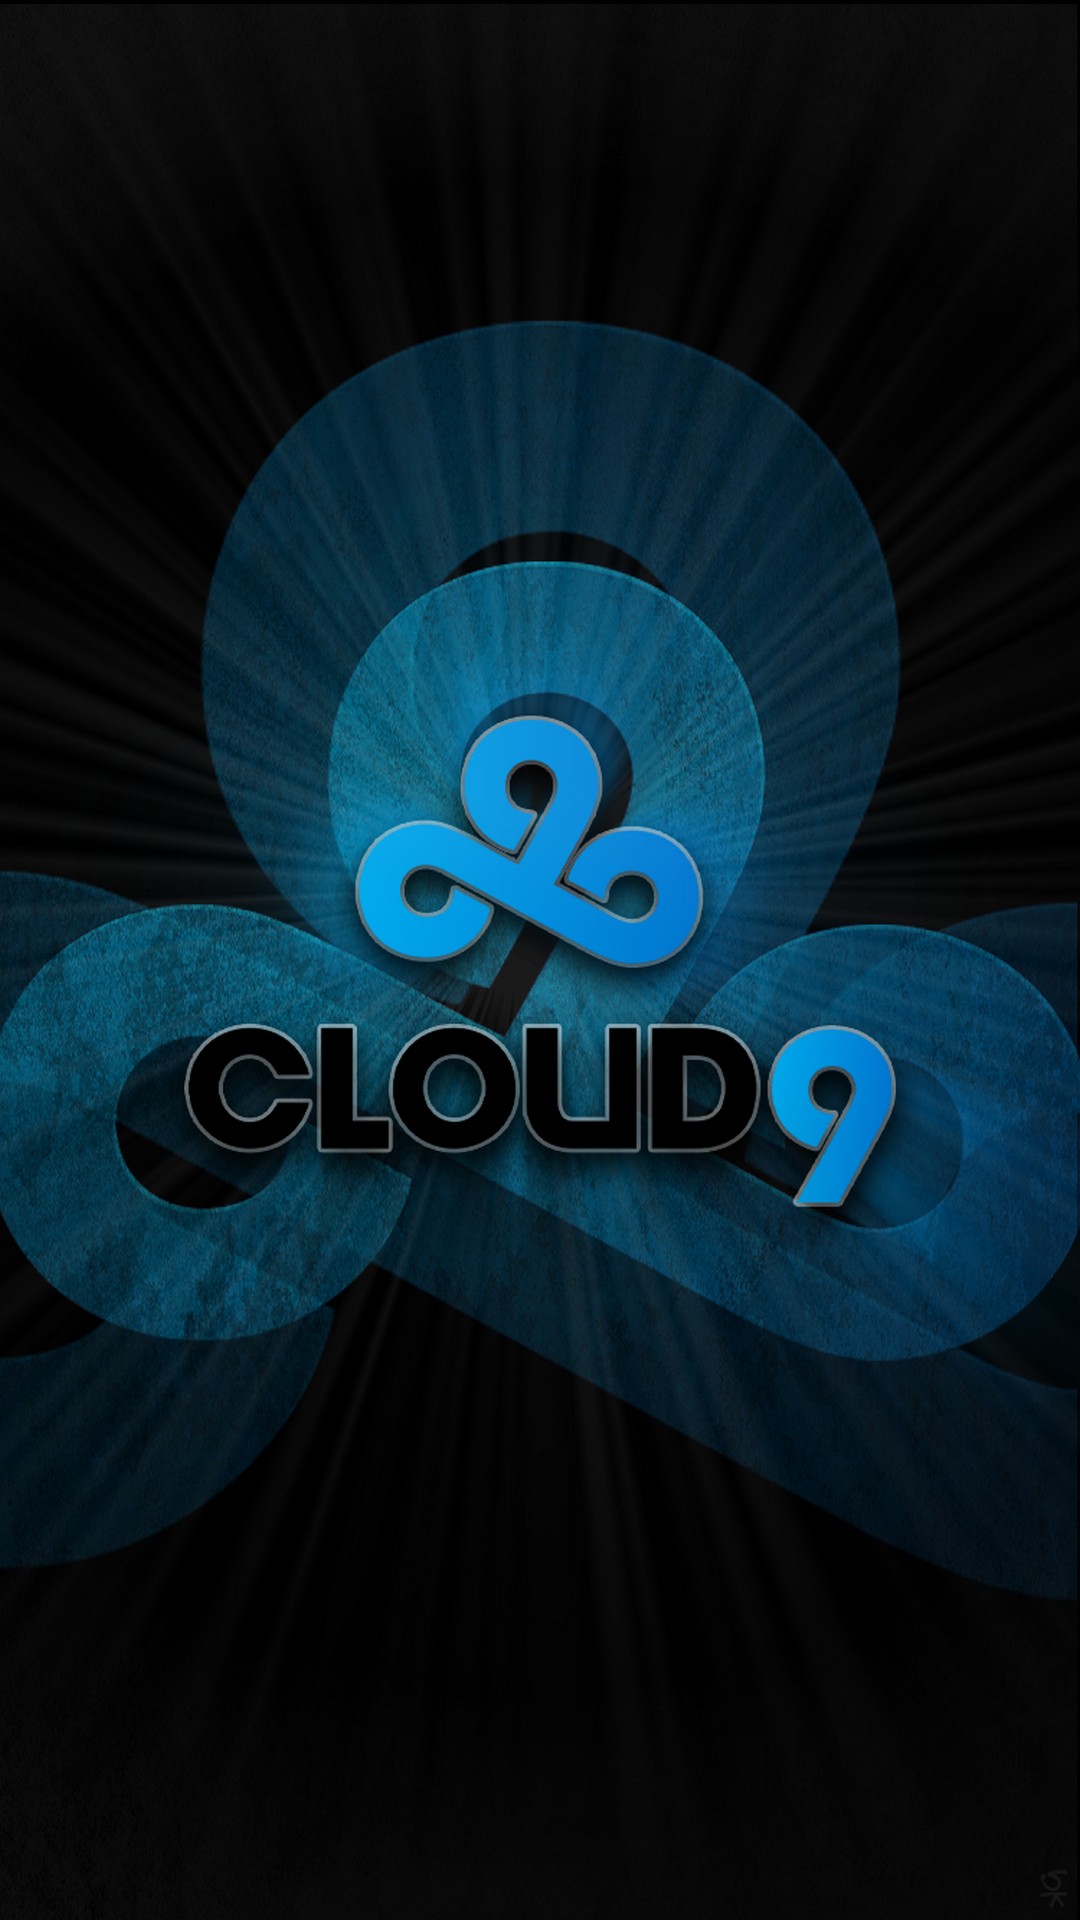 Android Wallpaper HD Cloud 9 with HD resolution 1080x1920